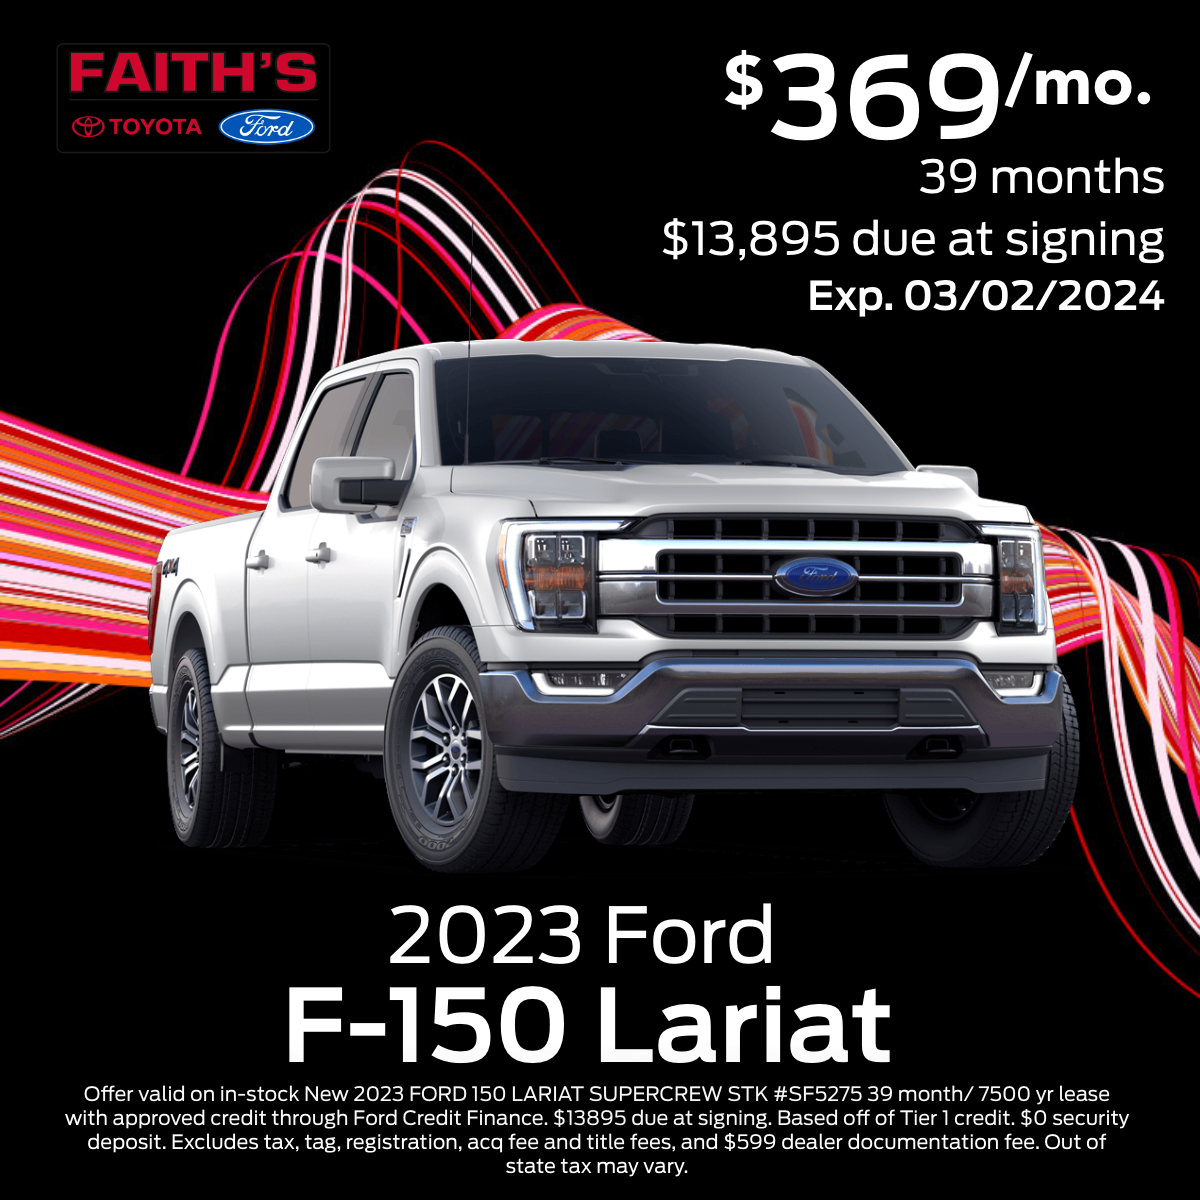 2023 Ford F-150 Lariat Lease Offer | Faiths Auto Group